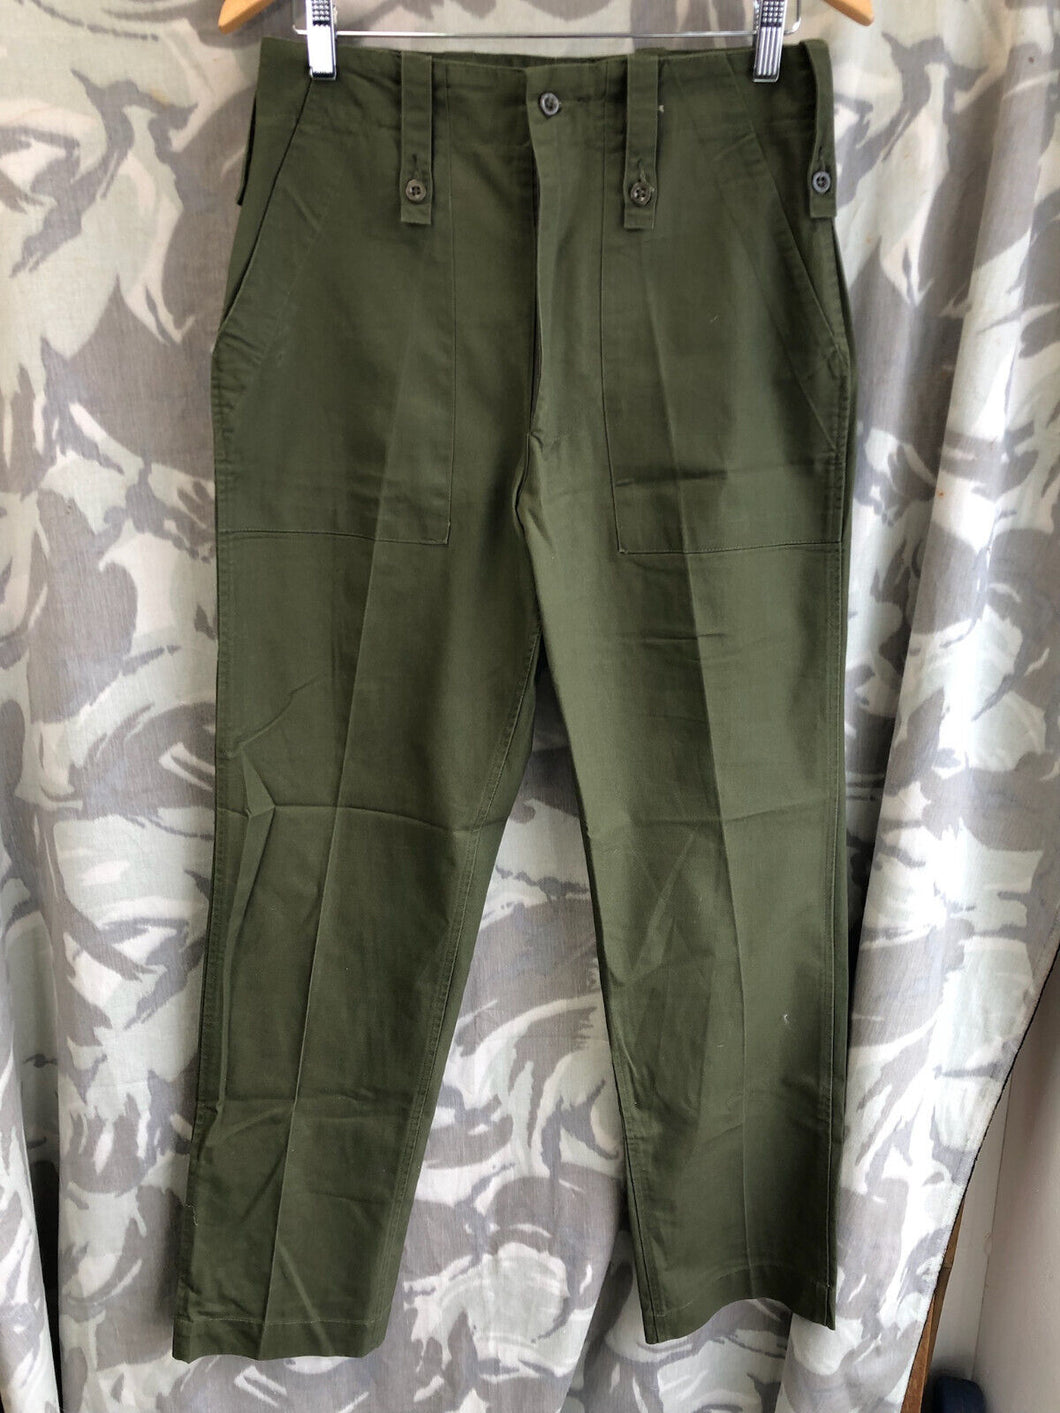 Genuine British Army Olive Green Lightweight Fatigue Combat Trousers - 85/80/96